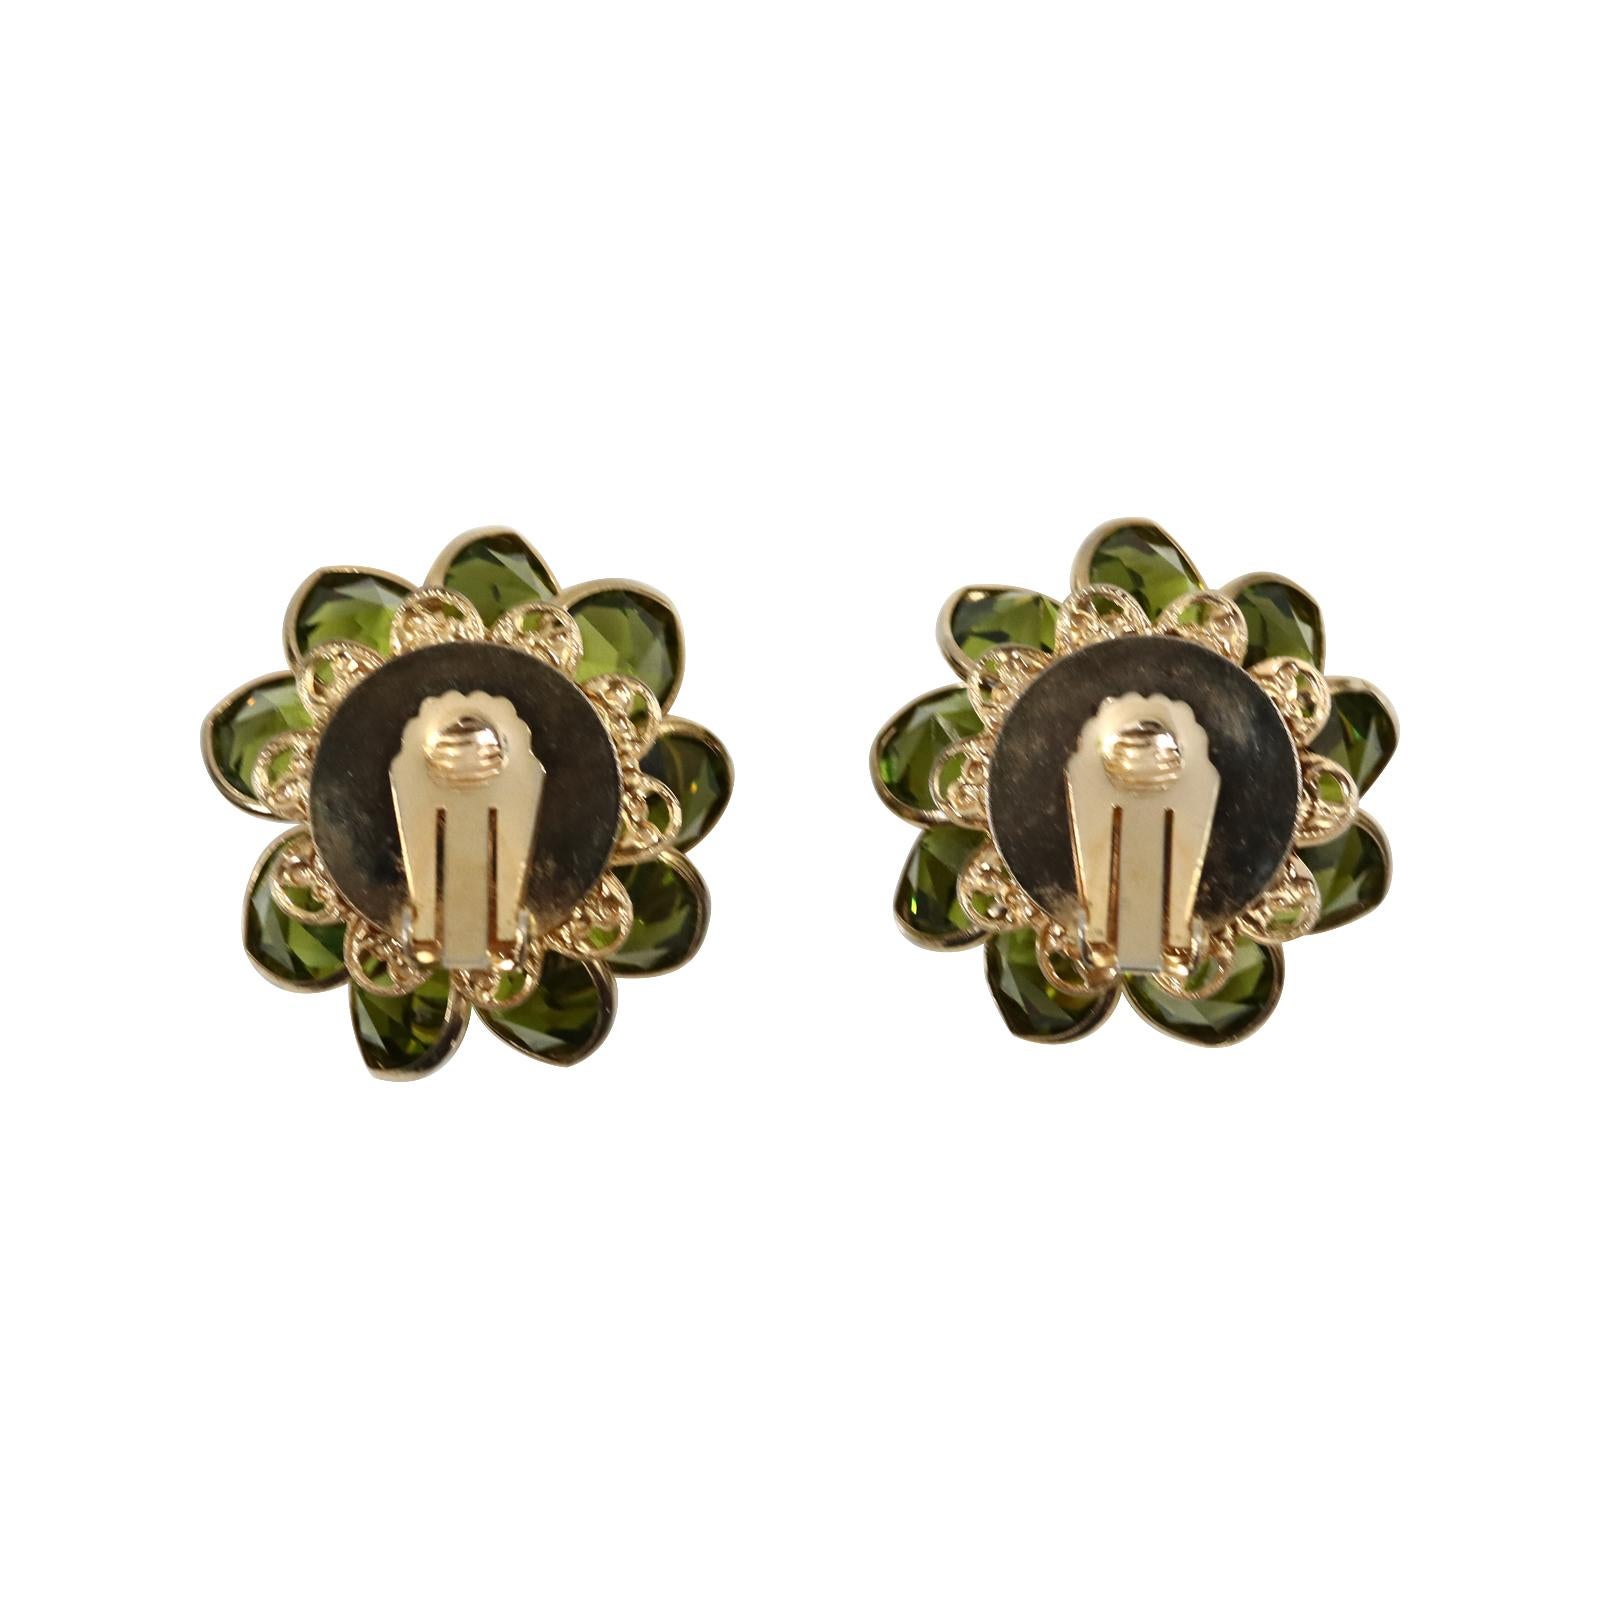 Vintage Poured Glass Gold Tone Green With Diamante Flower Earrings Circa 1960s For Sale 4